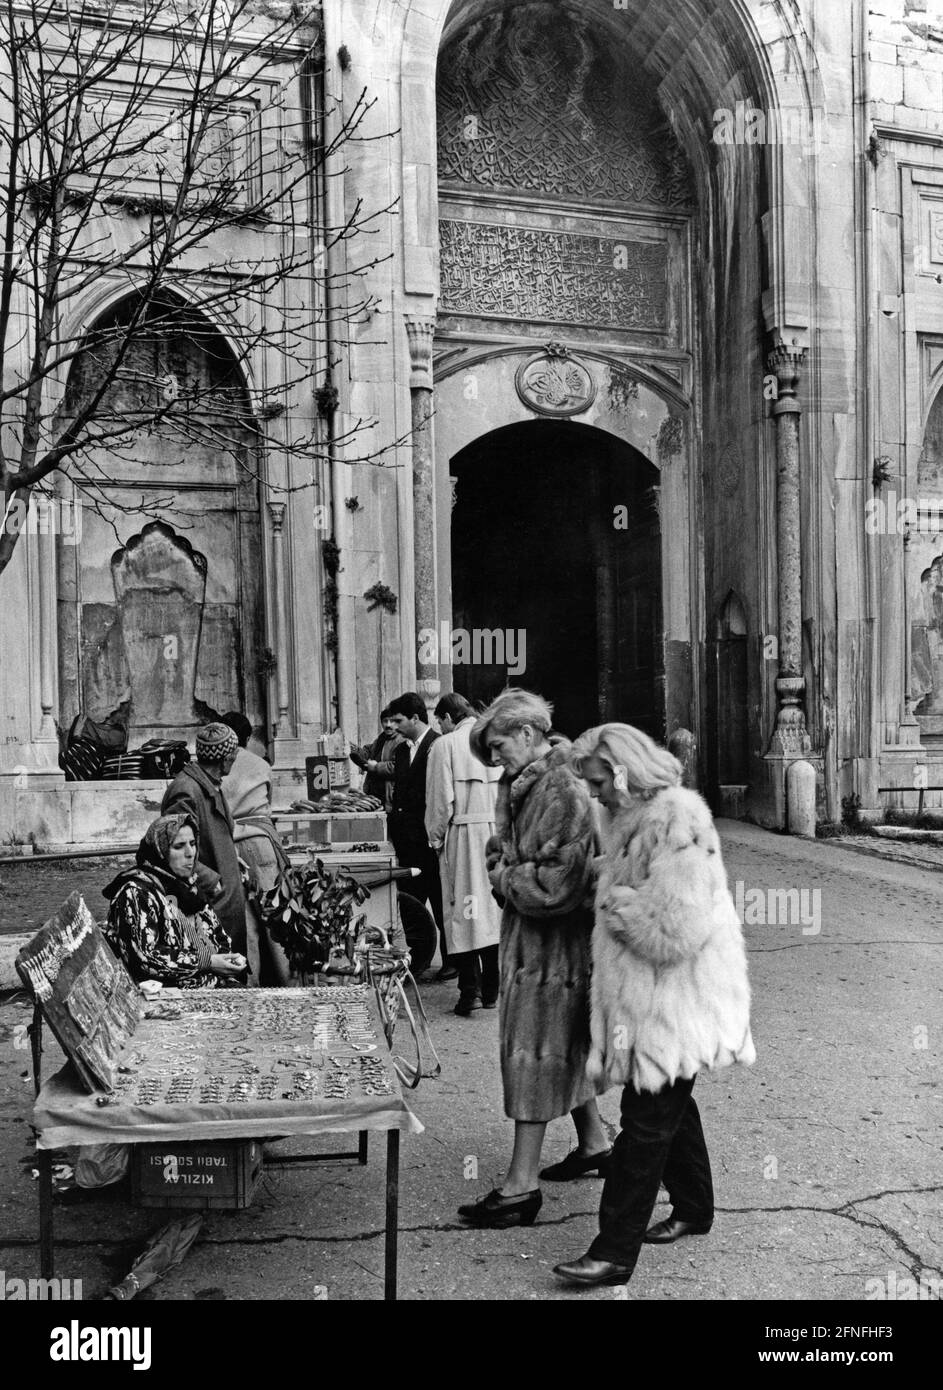 Souvenir stalls in front of the Bab-i Hamayin, the gateway to Topkapi Palace attract tourists even in the winter season. Photo undated. [automated translation] Stock Photo